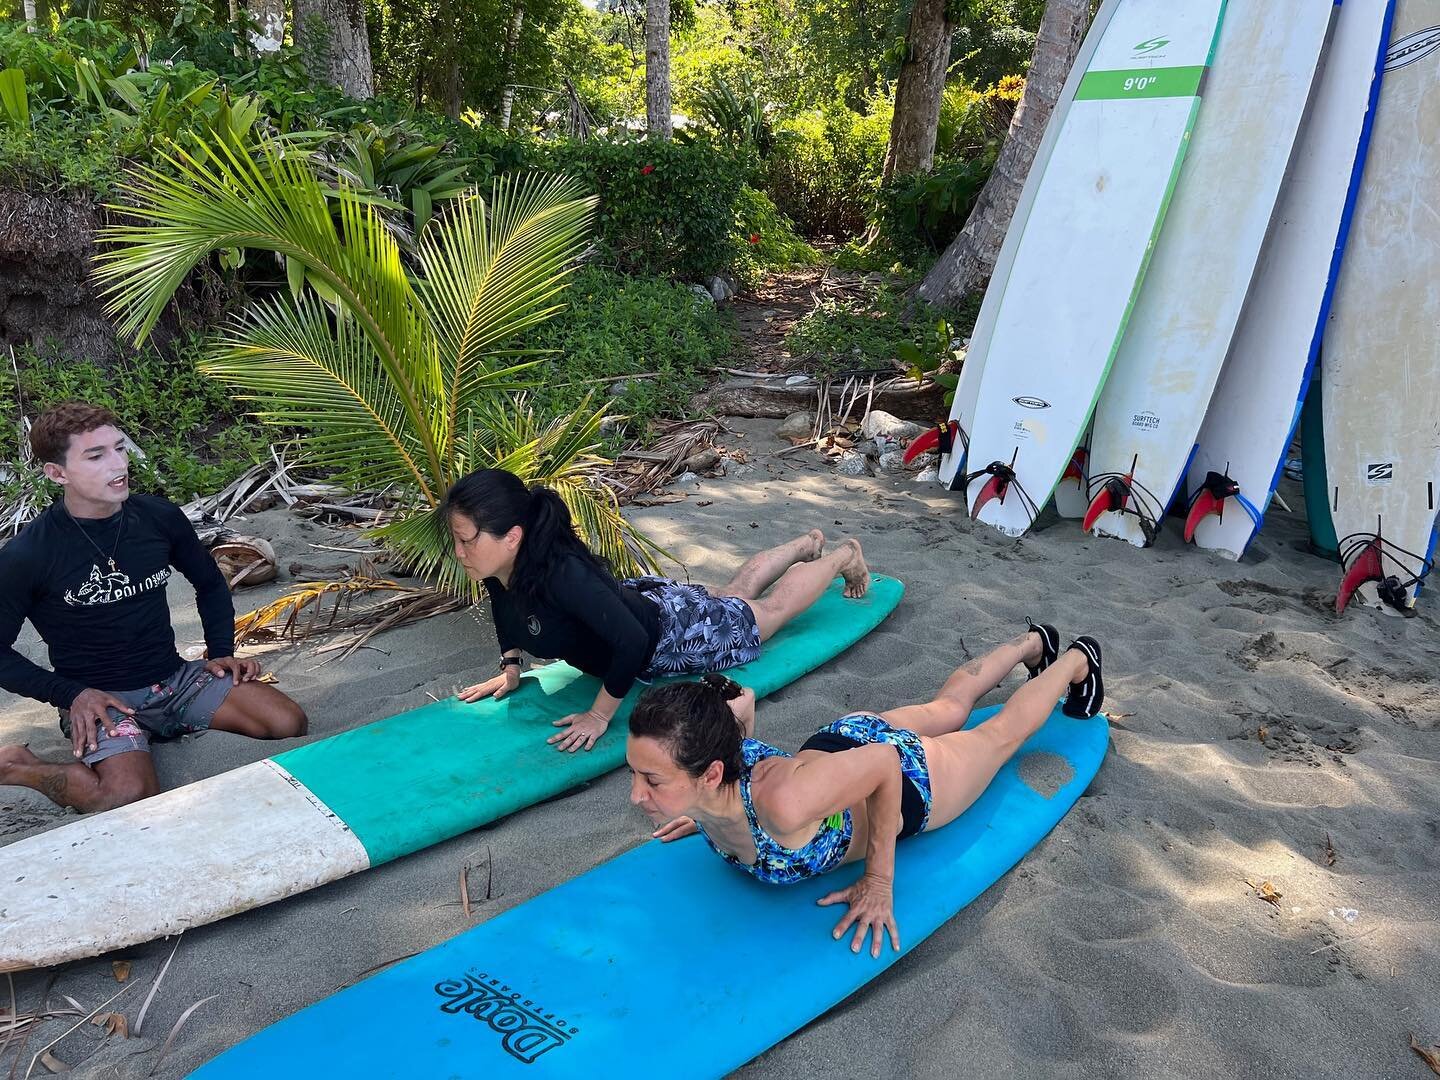 Post Costa Rica bliss is following me. Come join my surf inspired slow flow class - subbing @the_corner_studio_yoga Saturday May 6th 12-1pm #surfsup #slowflow #bostonyoga @yogawithshireen photo cred: @nikkivilella Thabks for capturing the moment!